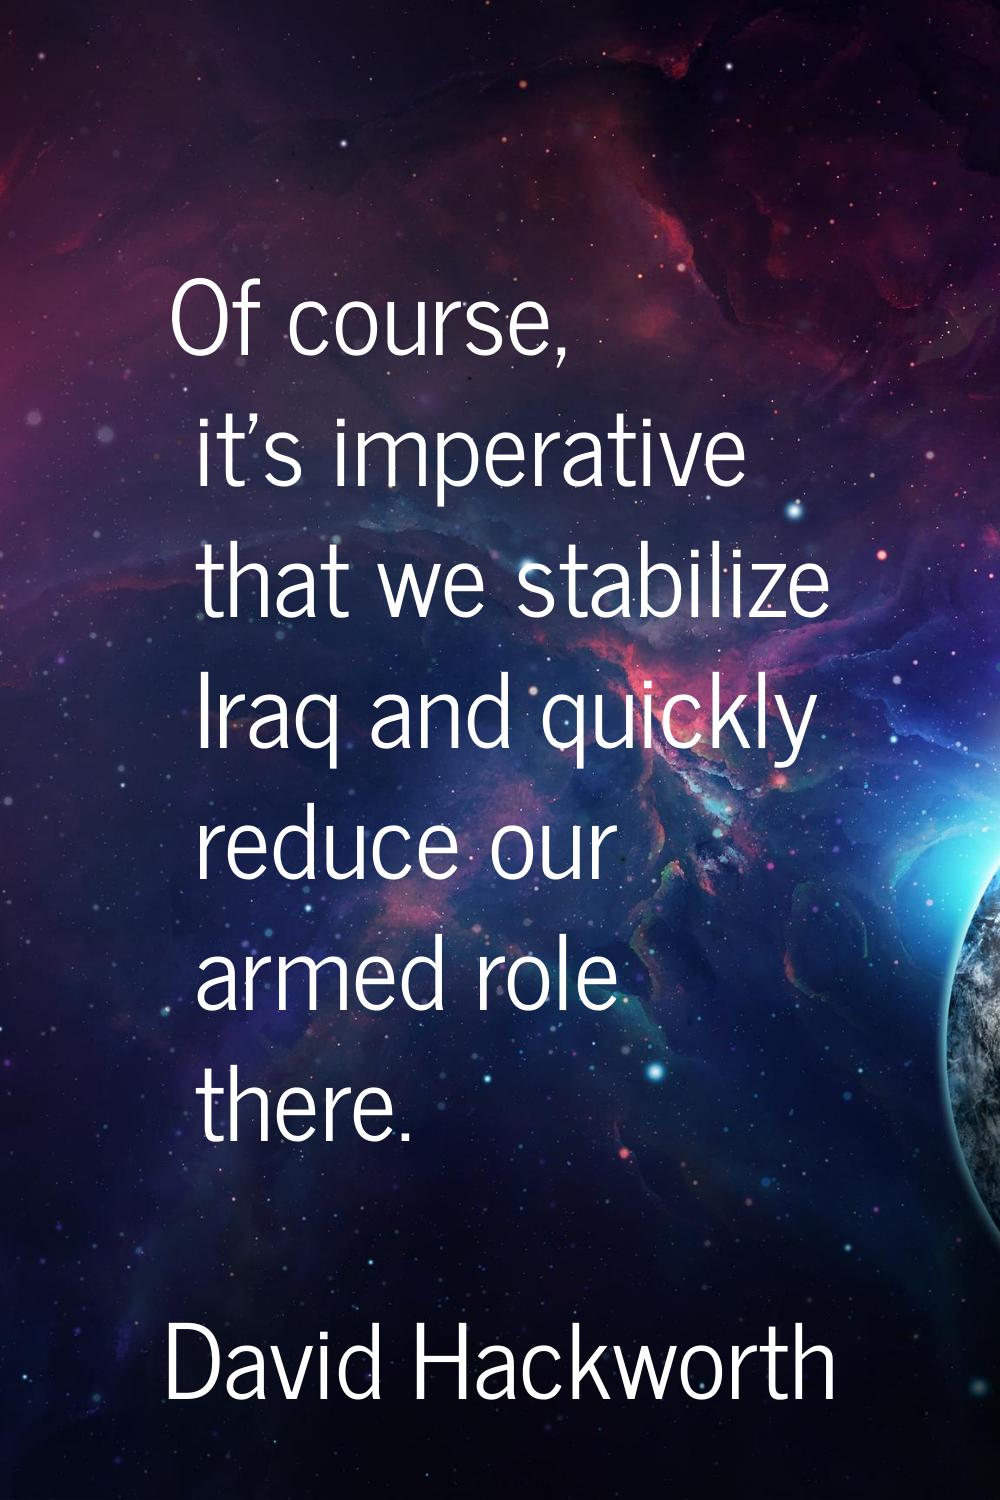 Of course, it's imperative that we stabilize Iraq and quickly reduce our armed role there.